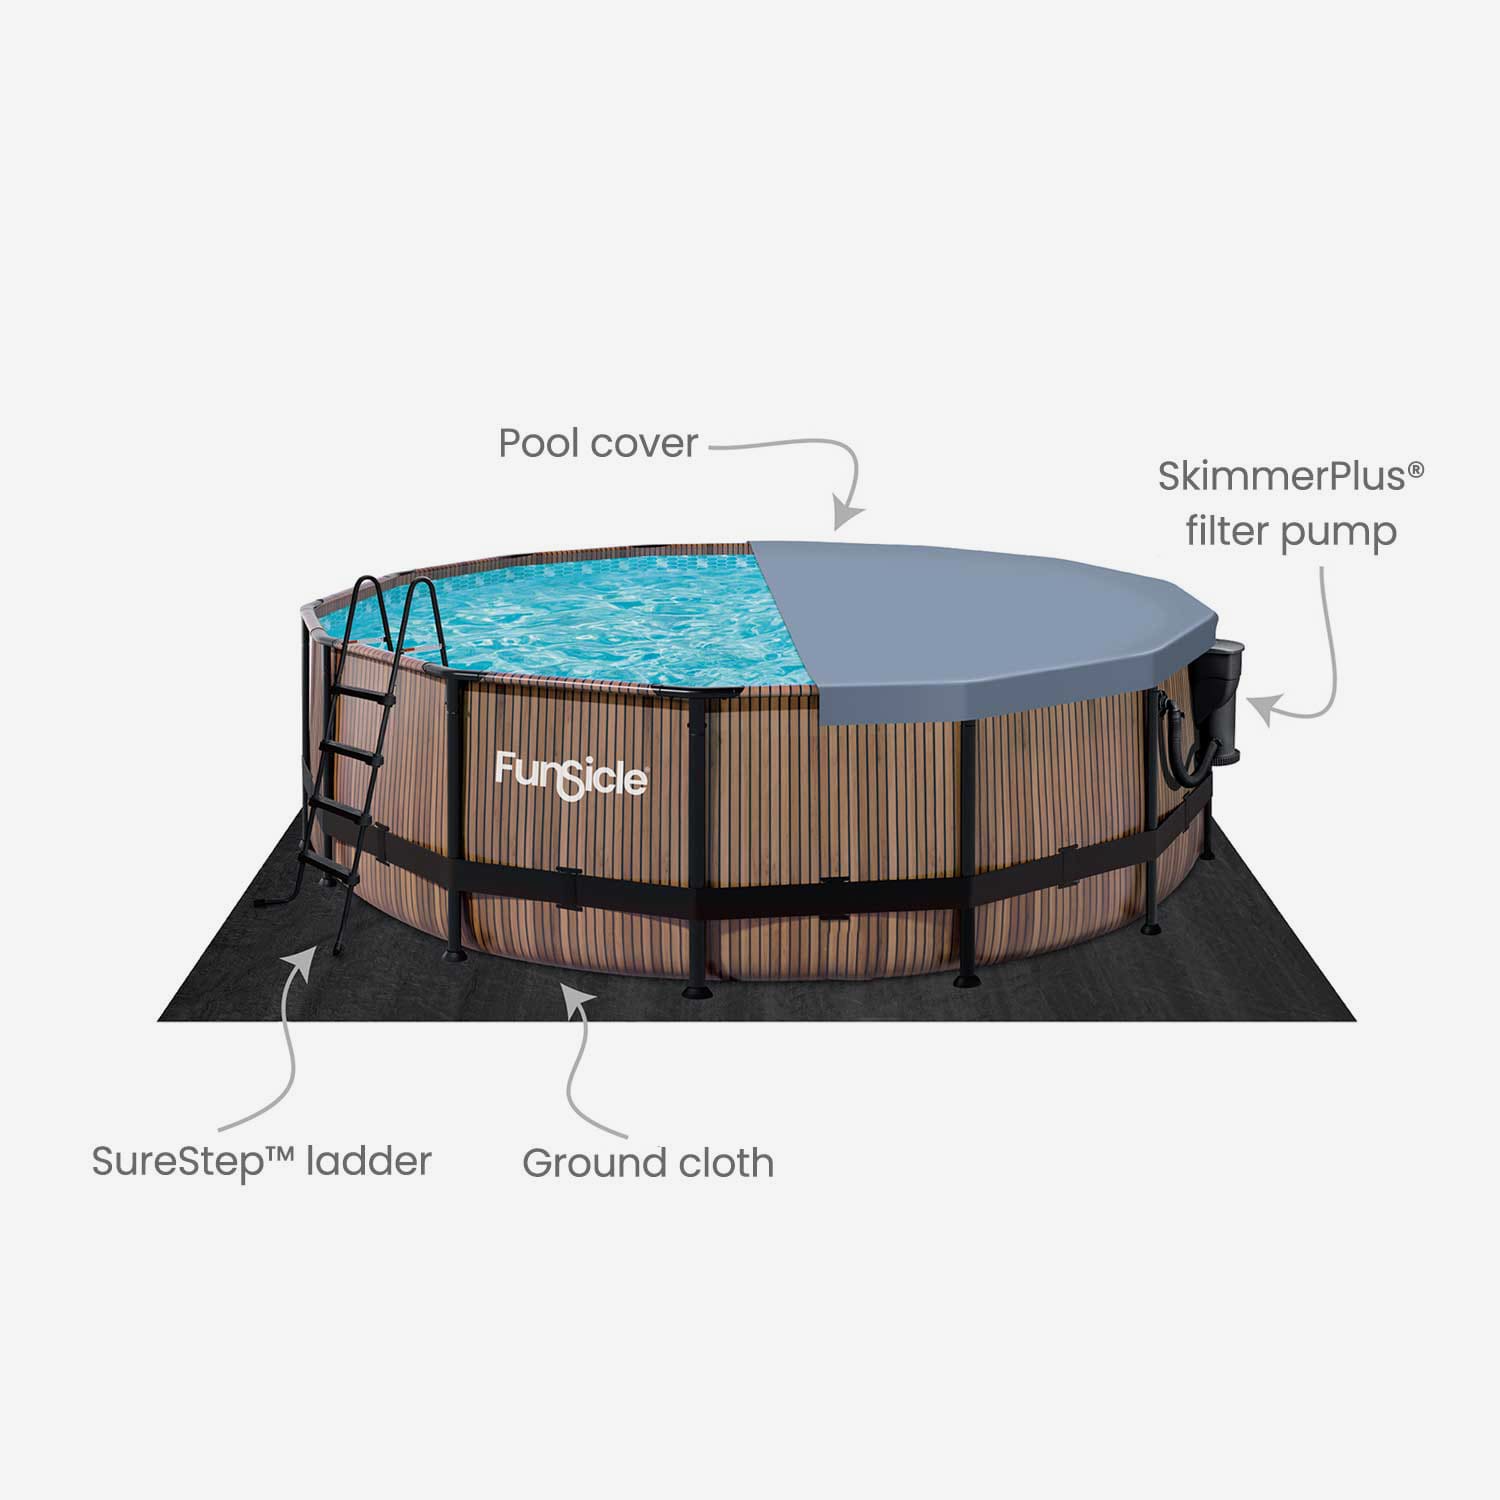 Funsicle 16 ft Oasis Designer Pool - Natural Teak with callout features